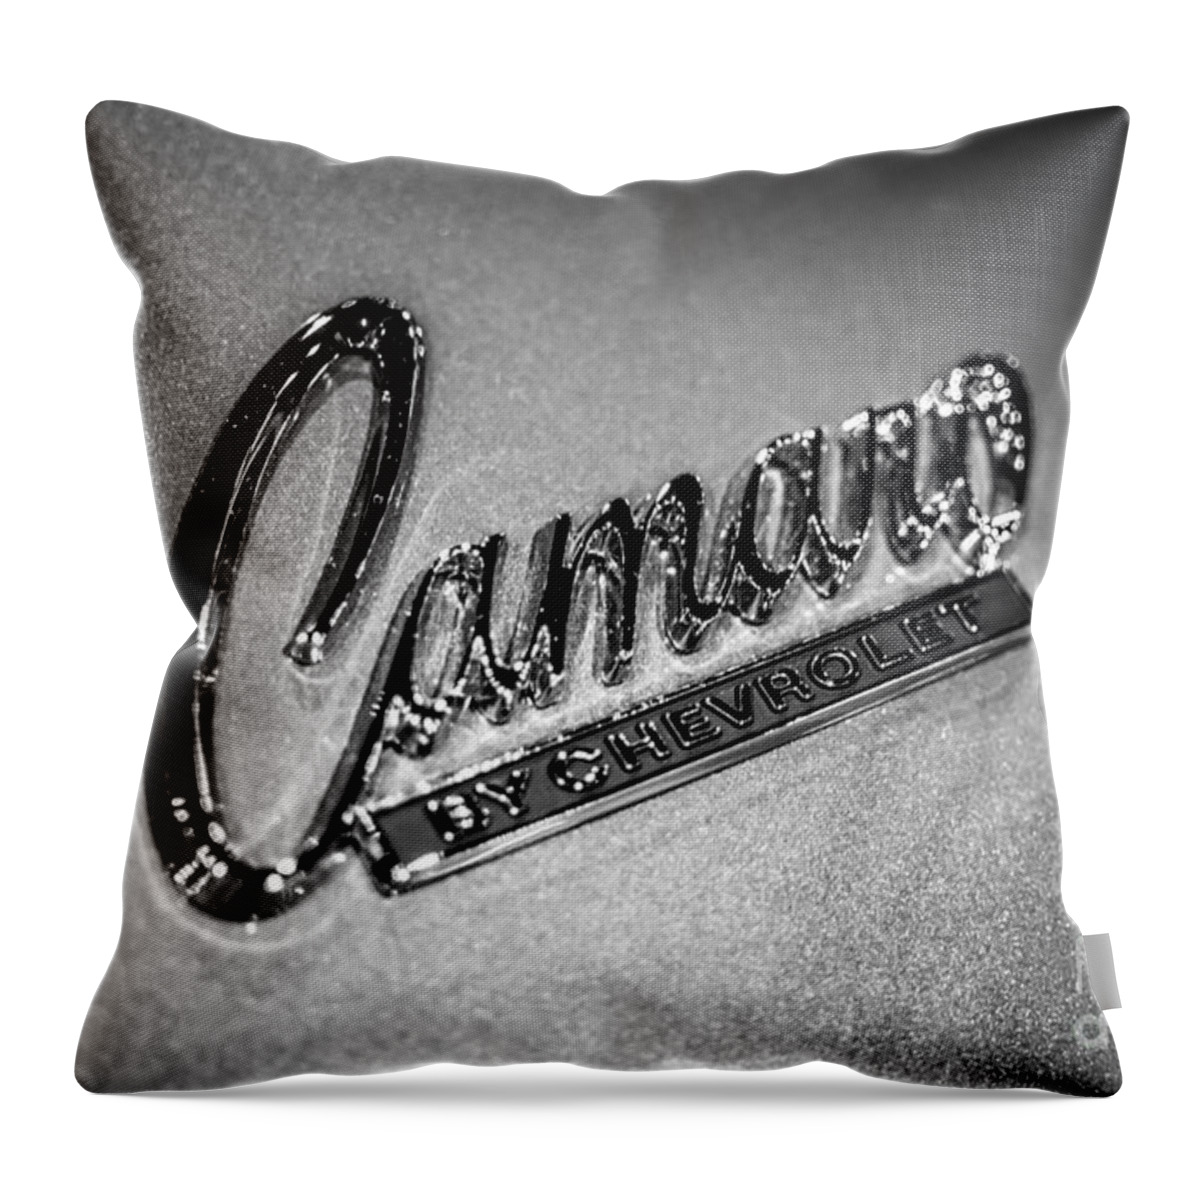 American Throw Pillow featuring the photograph Chevrolet Camaro Emblem by Paul Velgos